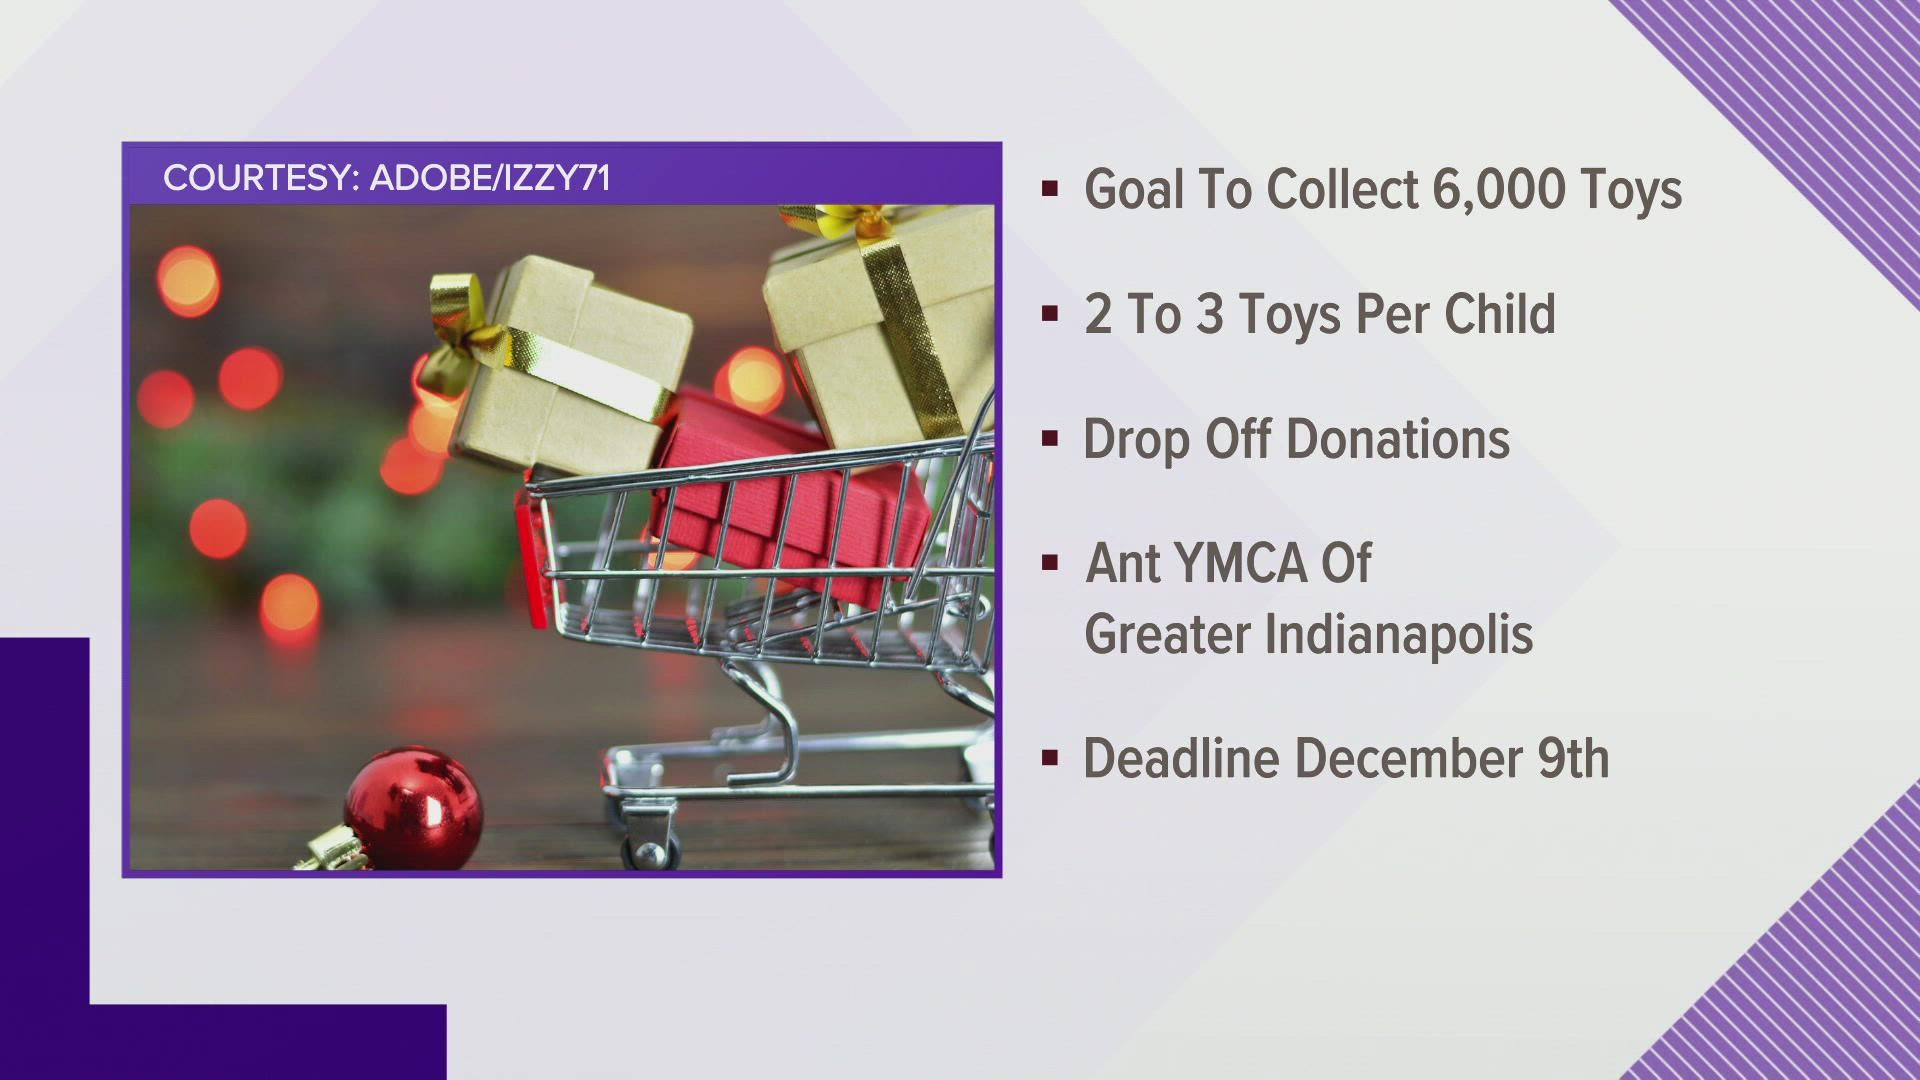 The YMCA's goal is to collect 6,000 toys so that kids can wake up to a few gifts on Christmas morning.